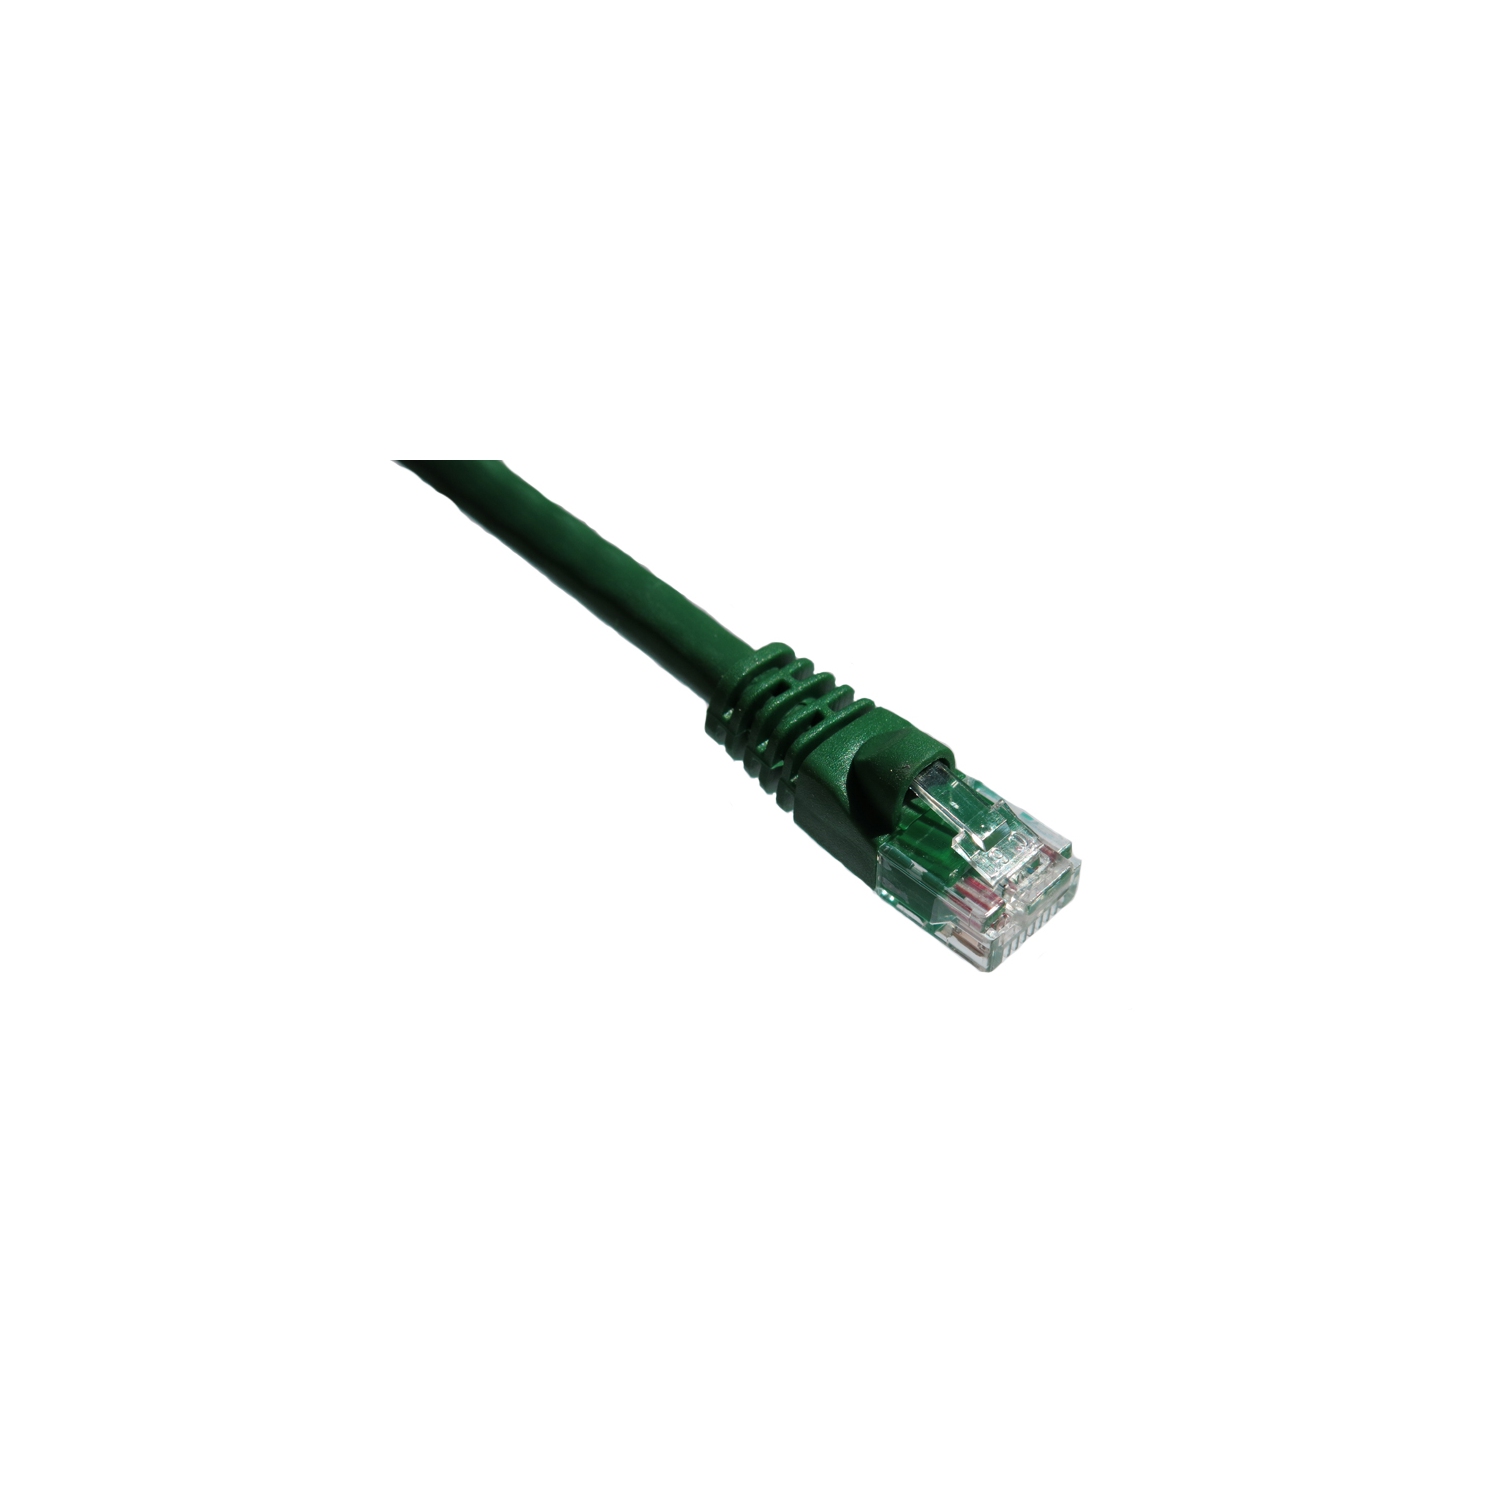 Axiom Memory 14ft Cat6 550mhz Molded Boot Patch Cable - Green - (C6MB-N14-AX)